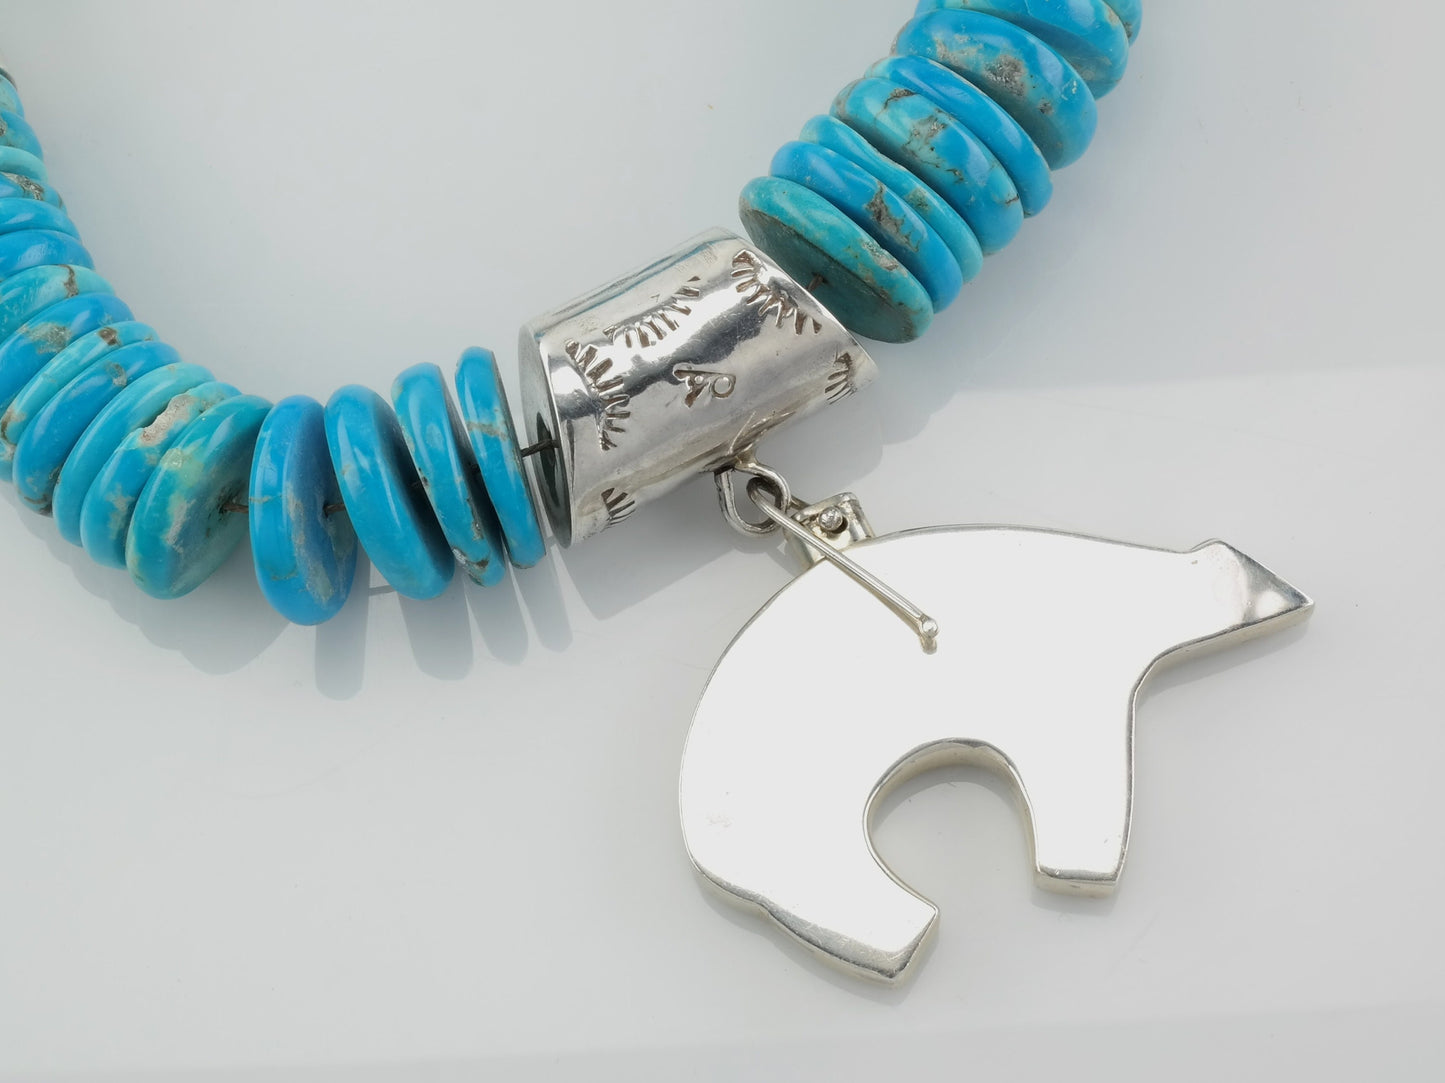 Vintage Native American Blue Turquoise Bear Heishi Necklace Sterling Silver